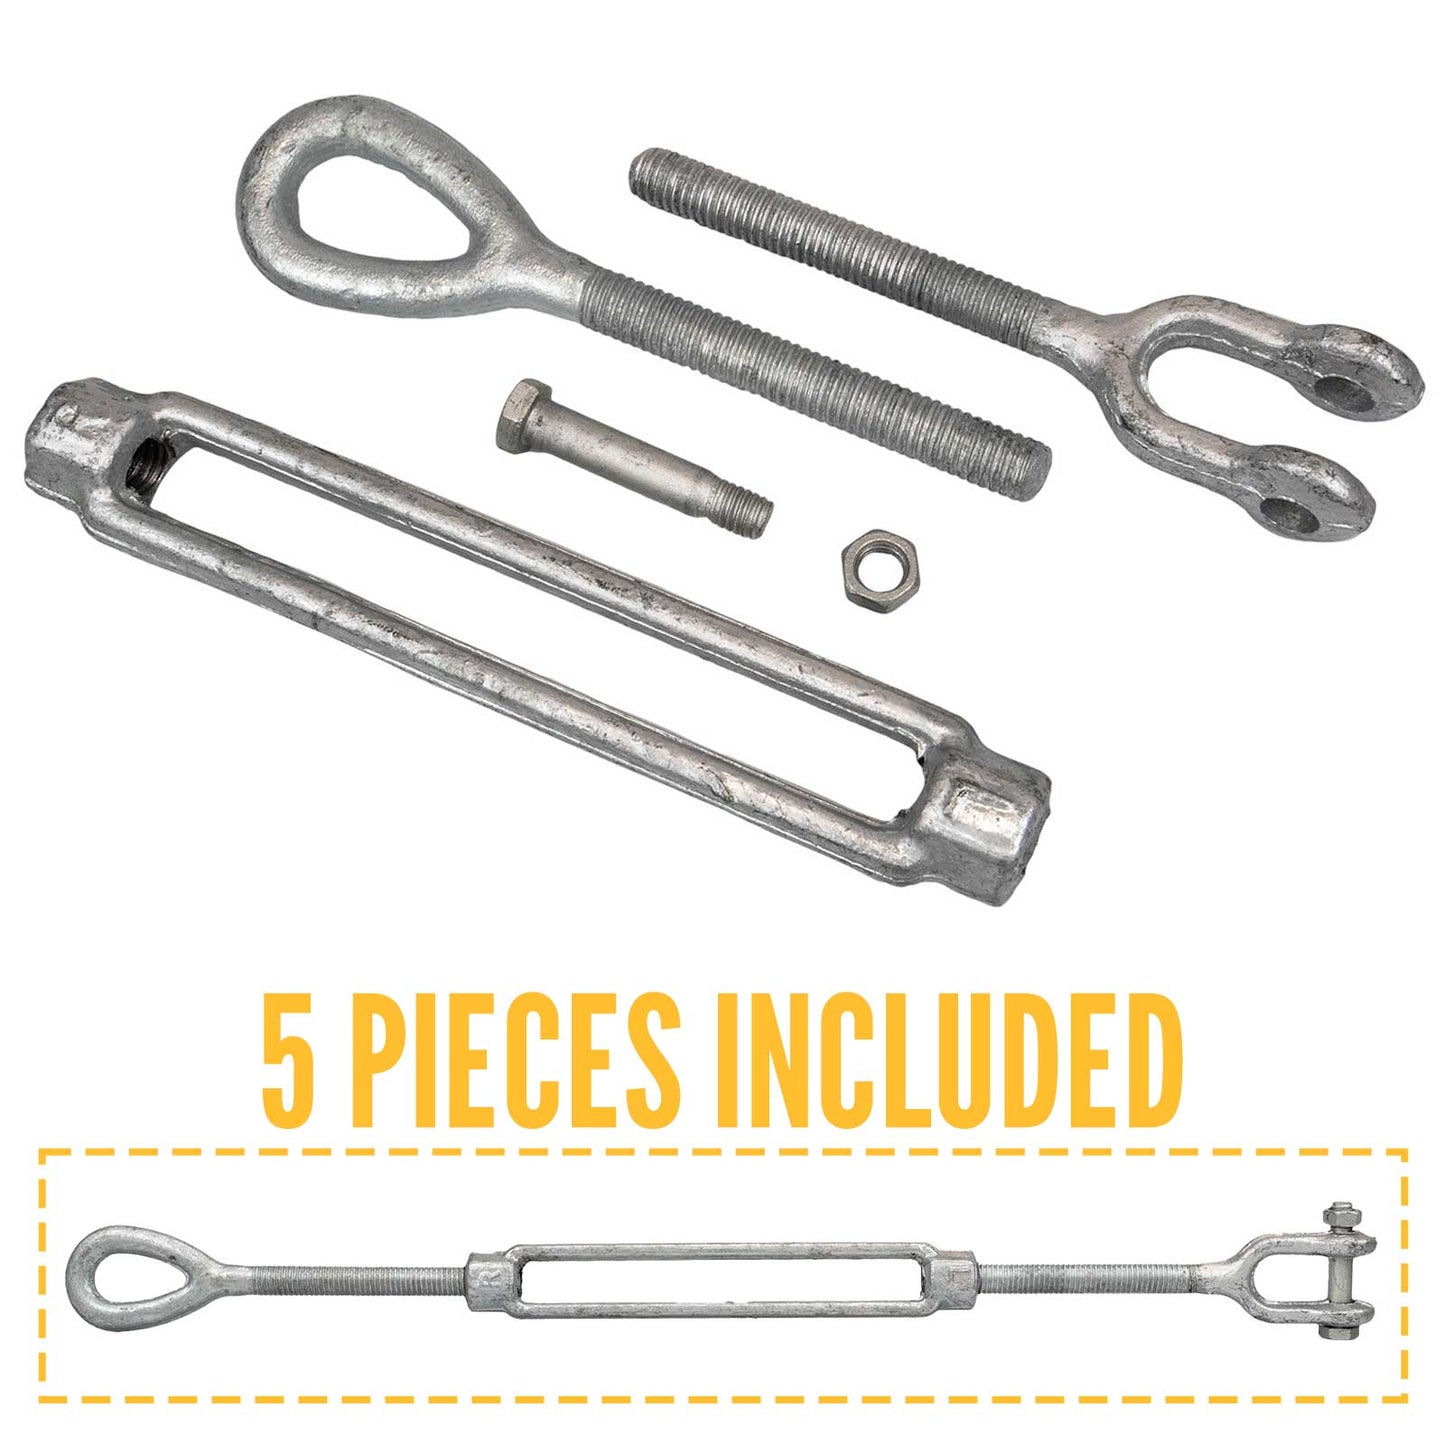 Turnbuckle included components